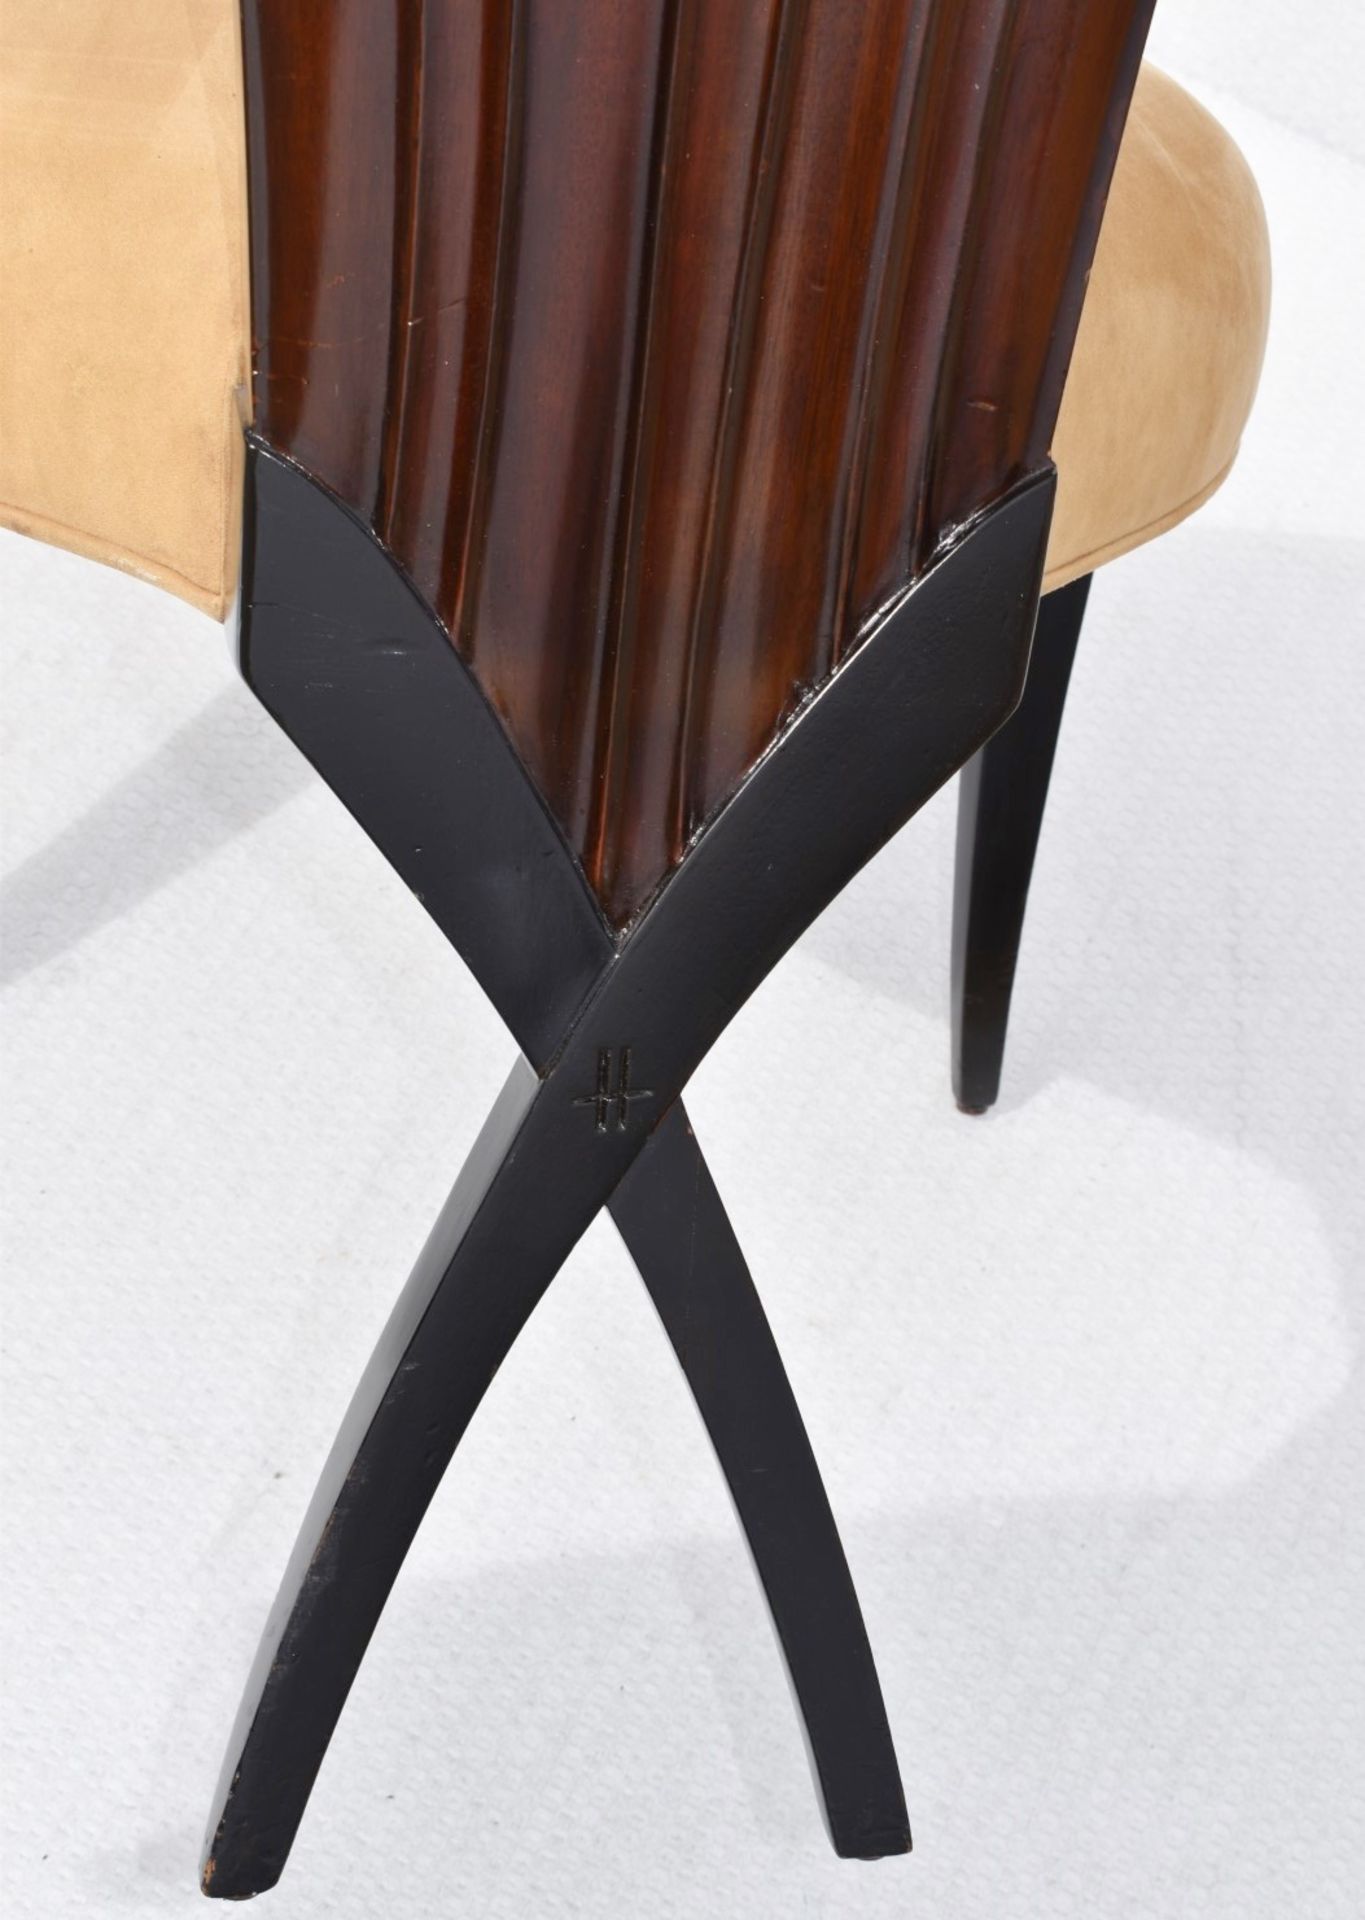 4 x CHRISTOPHER GUY 'La Croisette' Luxury Hand-carved Solid Mahogany Designer Dining Chairs - - Image 6 of 13